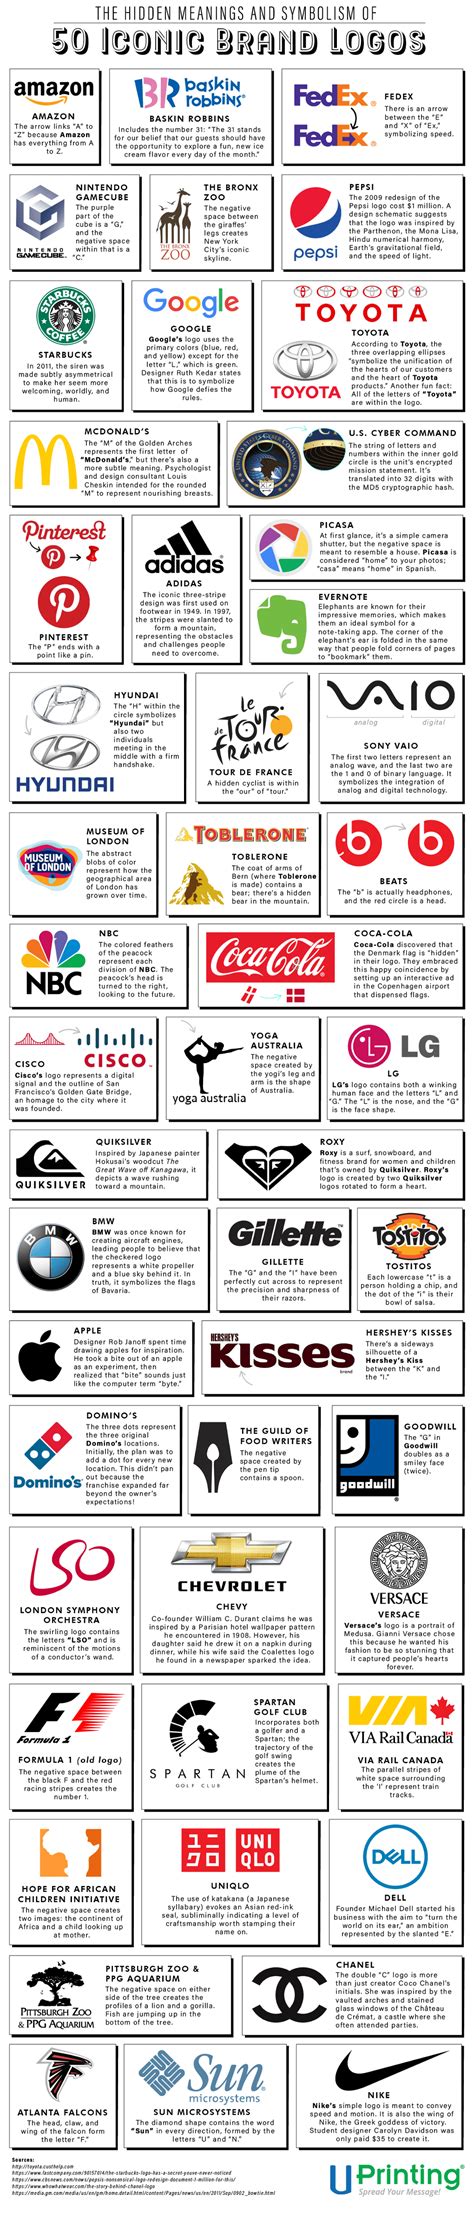 The Hidden Meanings And Symbolism Of 50 Iconic Brand Logos Coolguides